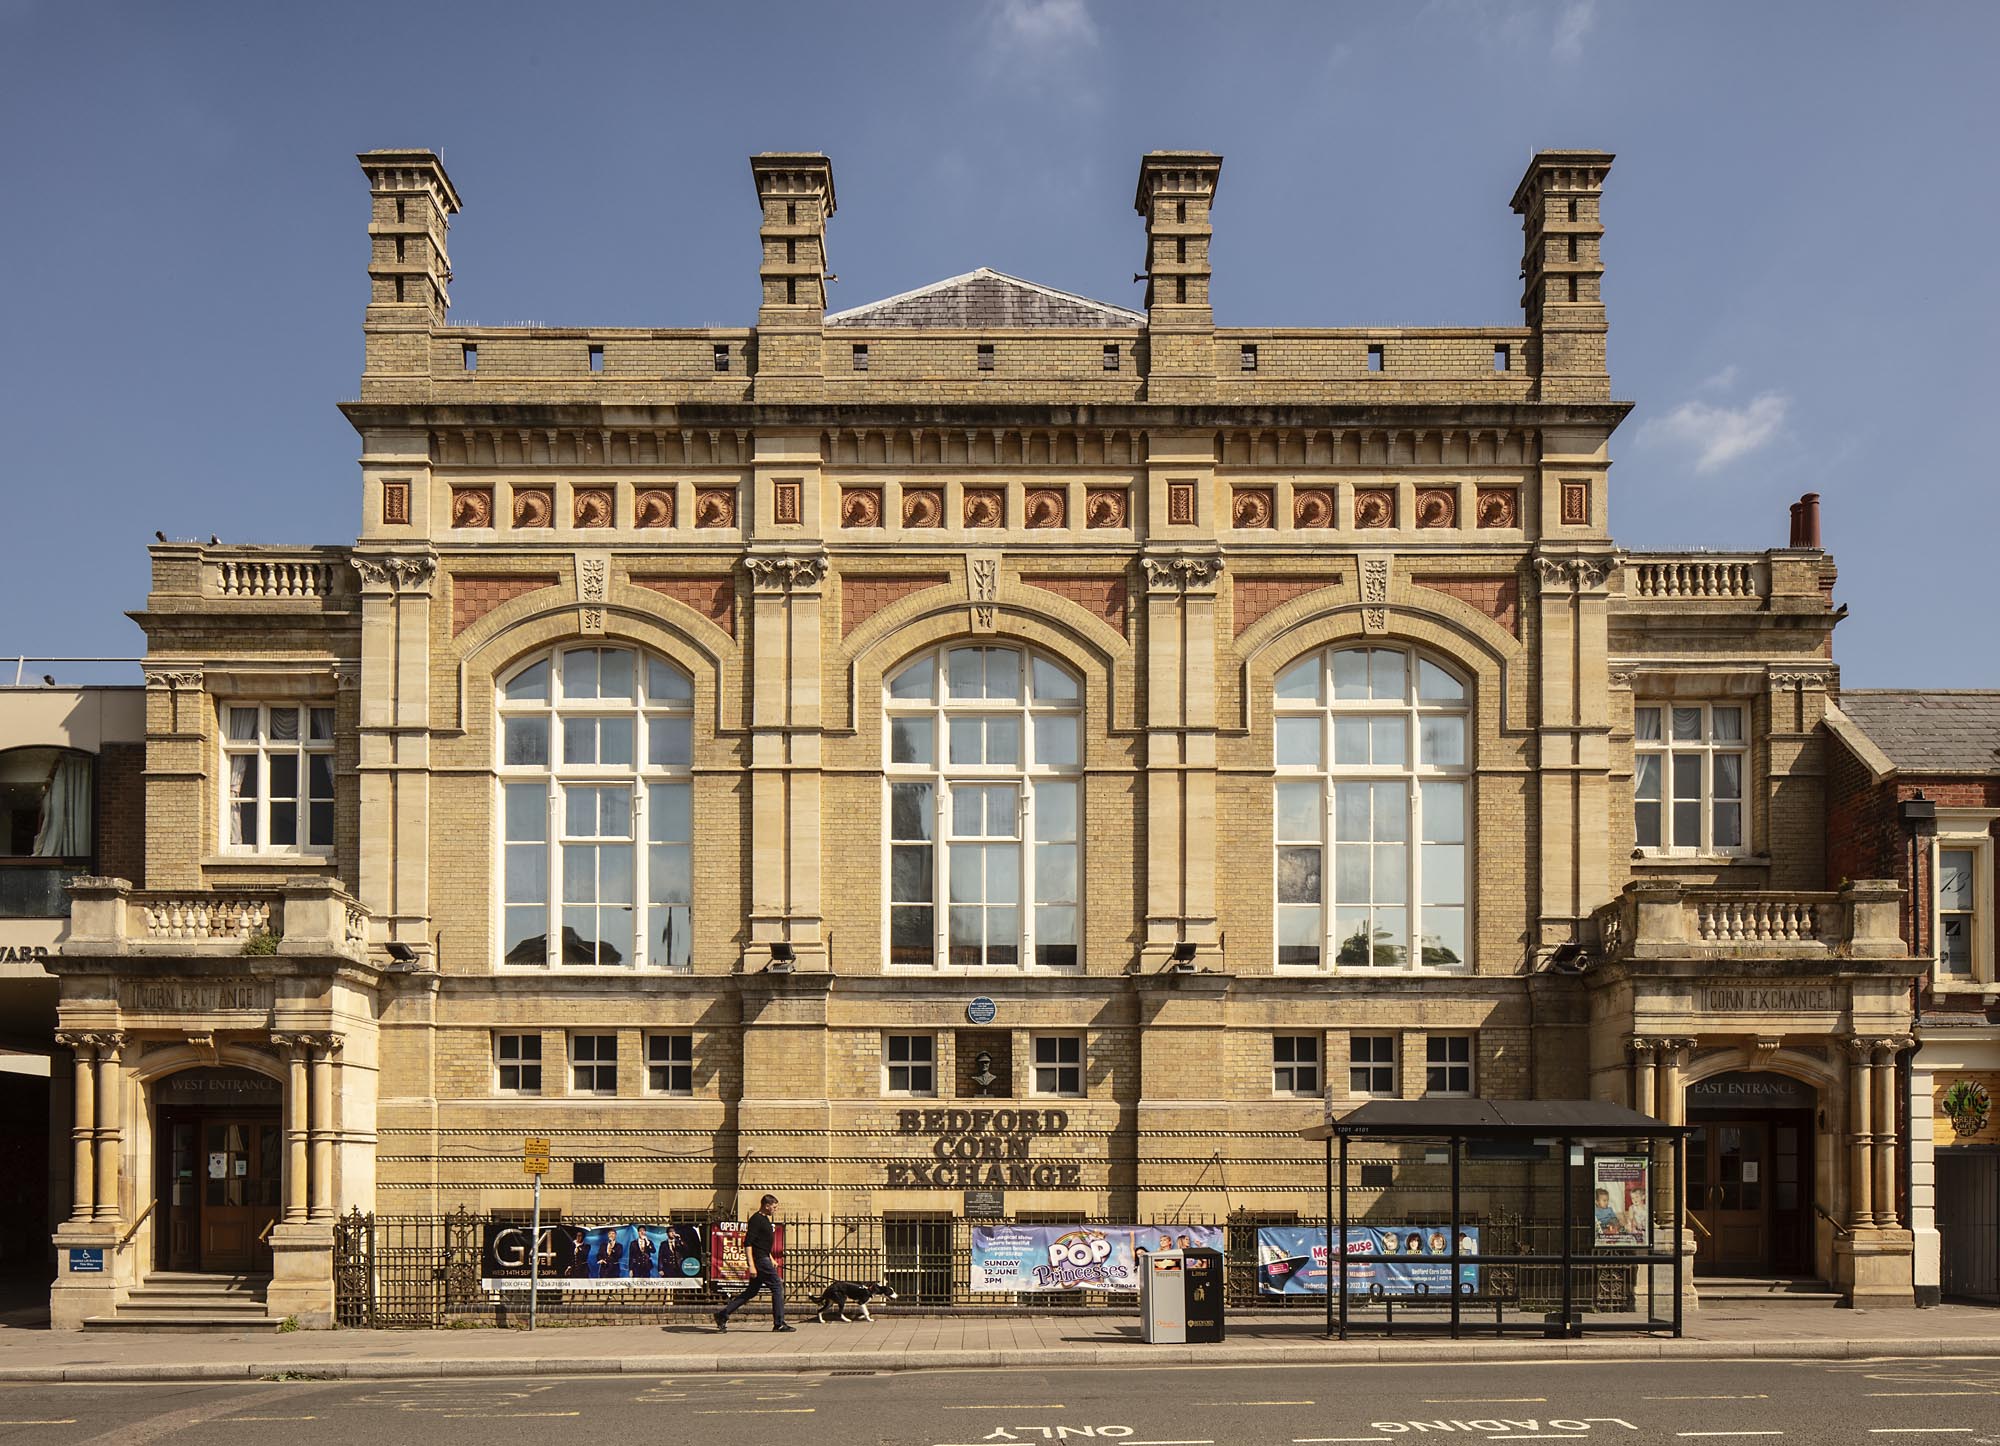 Front view of the Bedford Corn Exchange